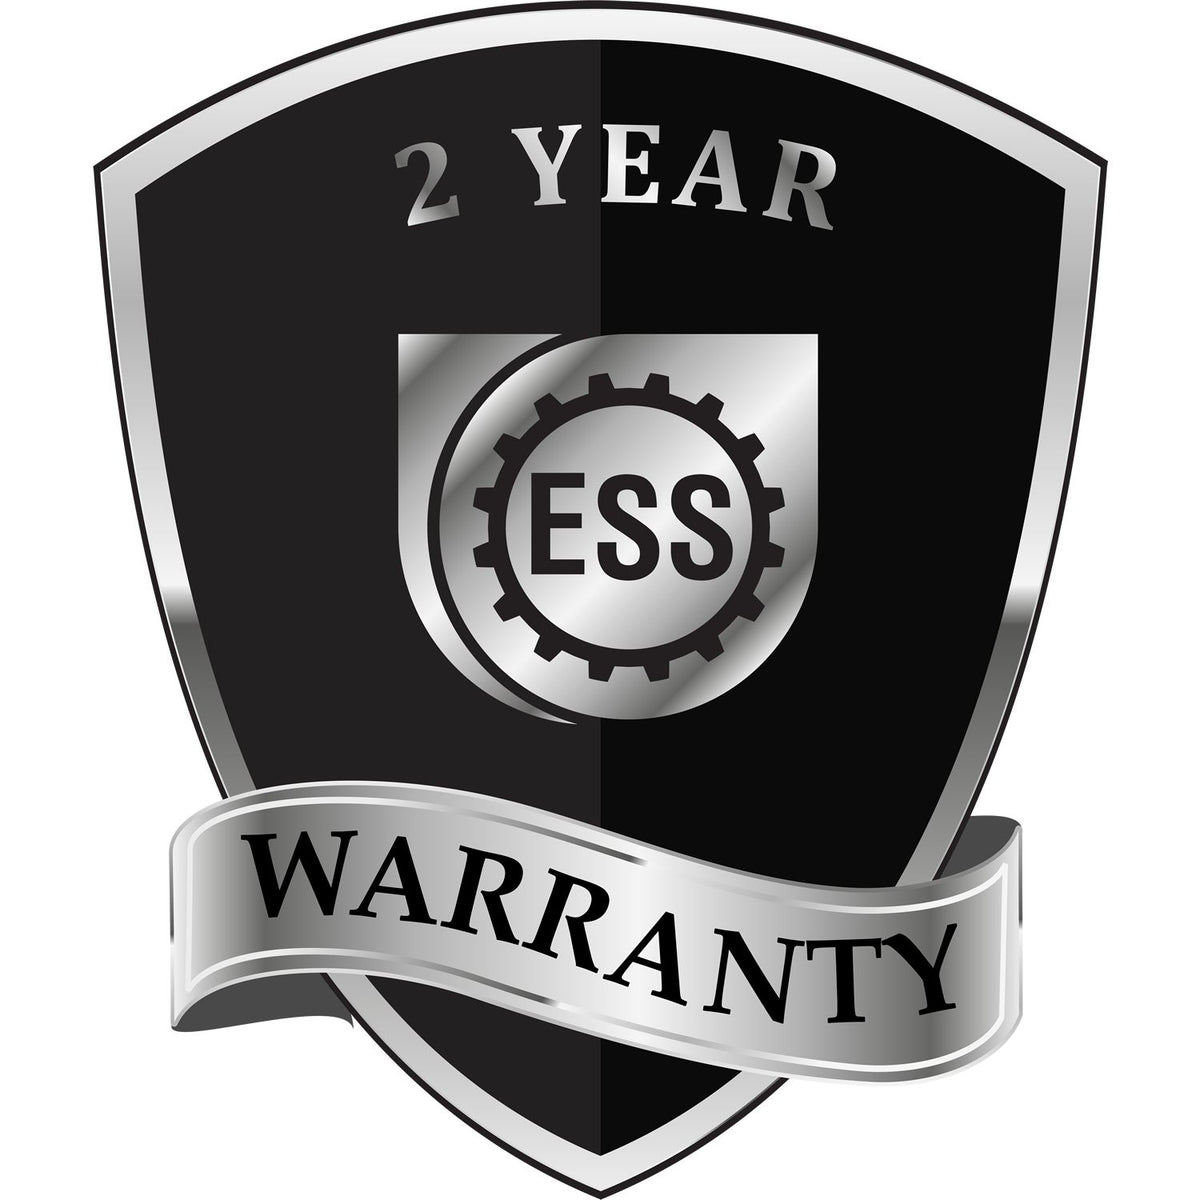 A black and silver badge or emblem showing warranty information for the Hybrid Arizona Landscape Architect Seal